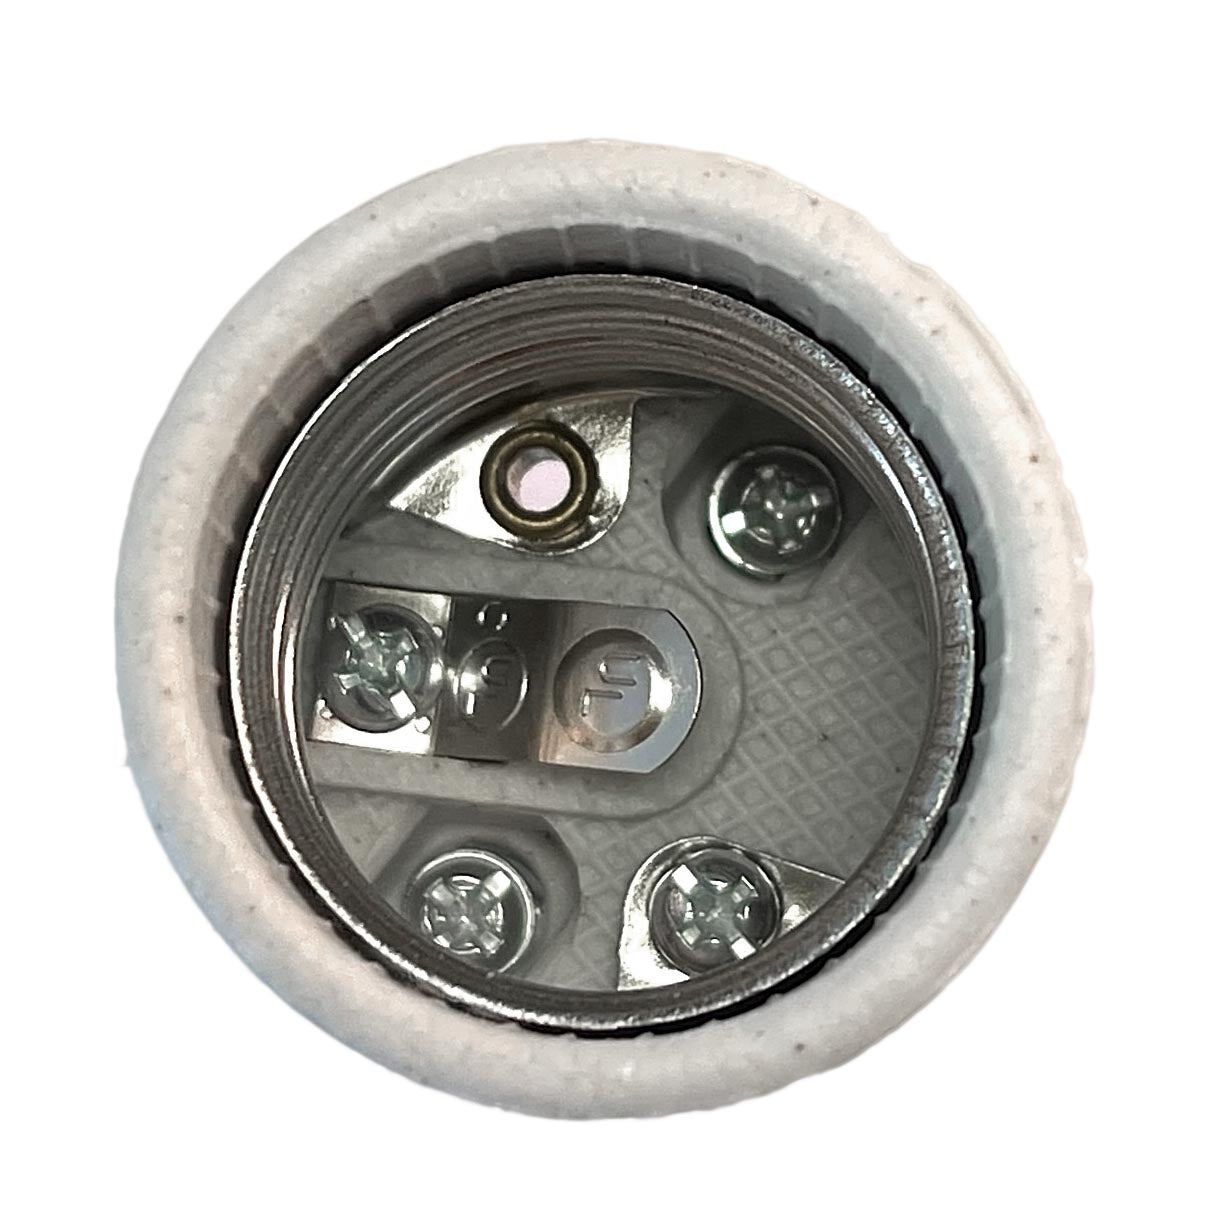 E26 Medium Porcelain Lamp Socket with 1/8F, 1/2" tall metal hickey and Easy Wire terminals, 250V, 660W (48306)